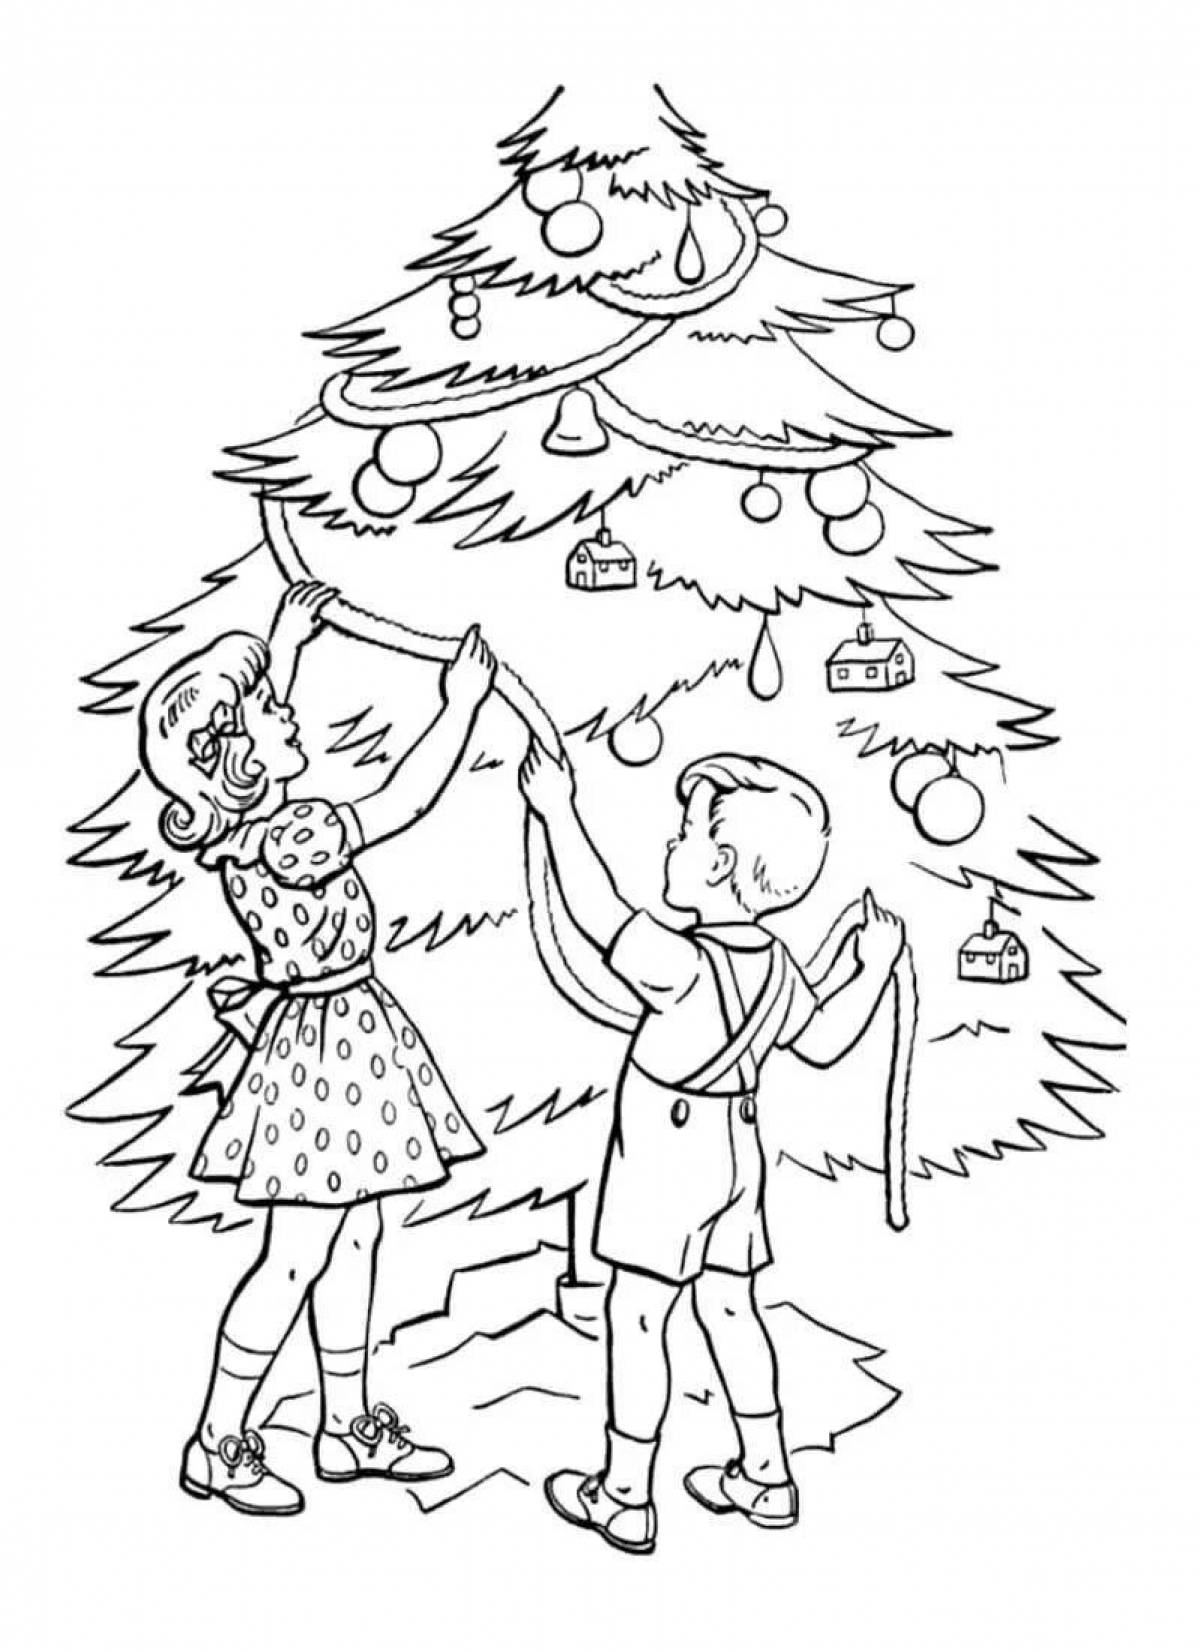 Fancy spruce coloring page